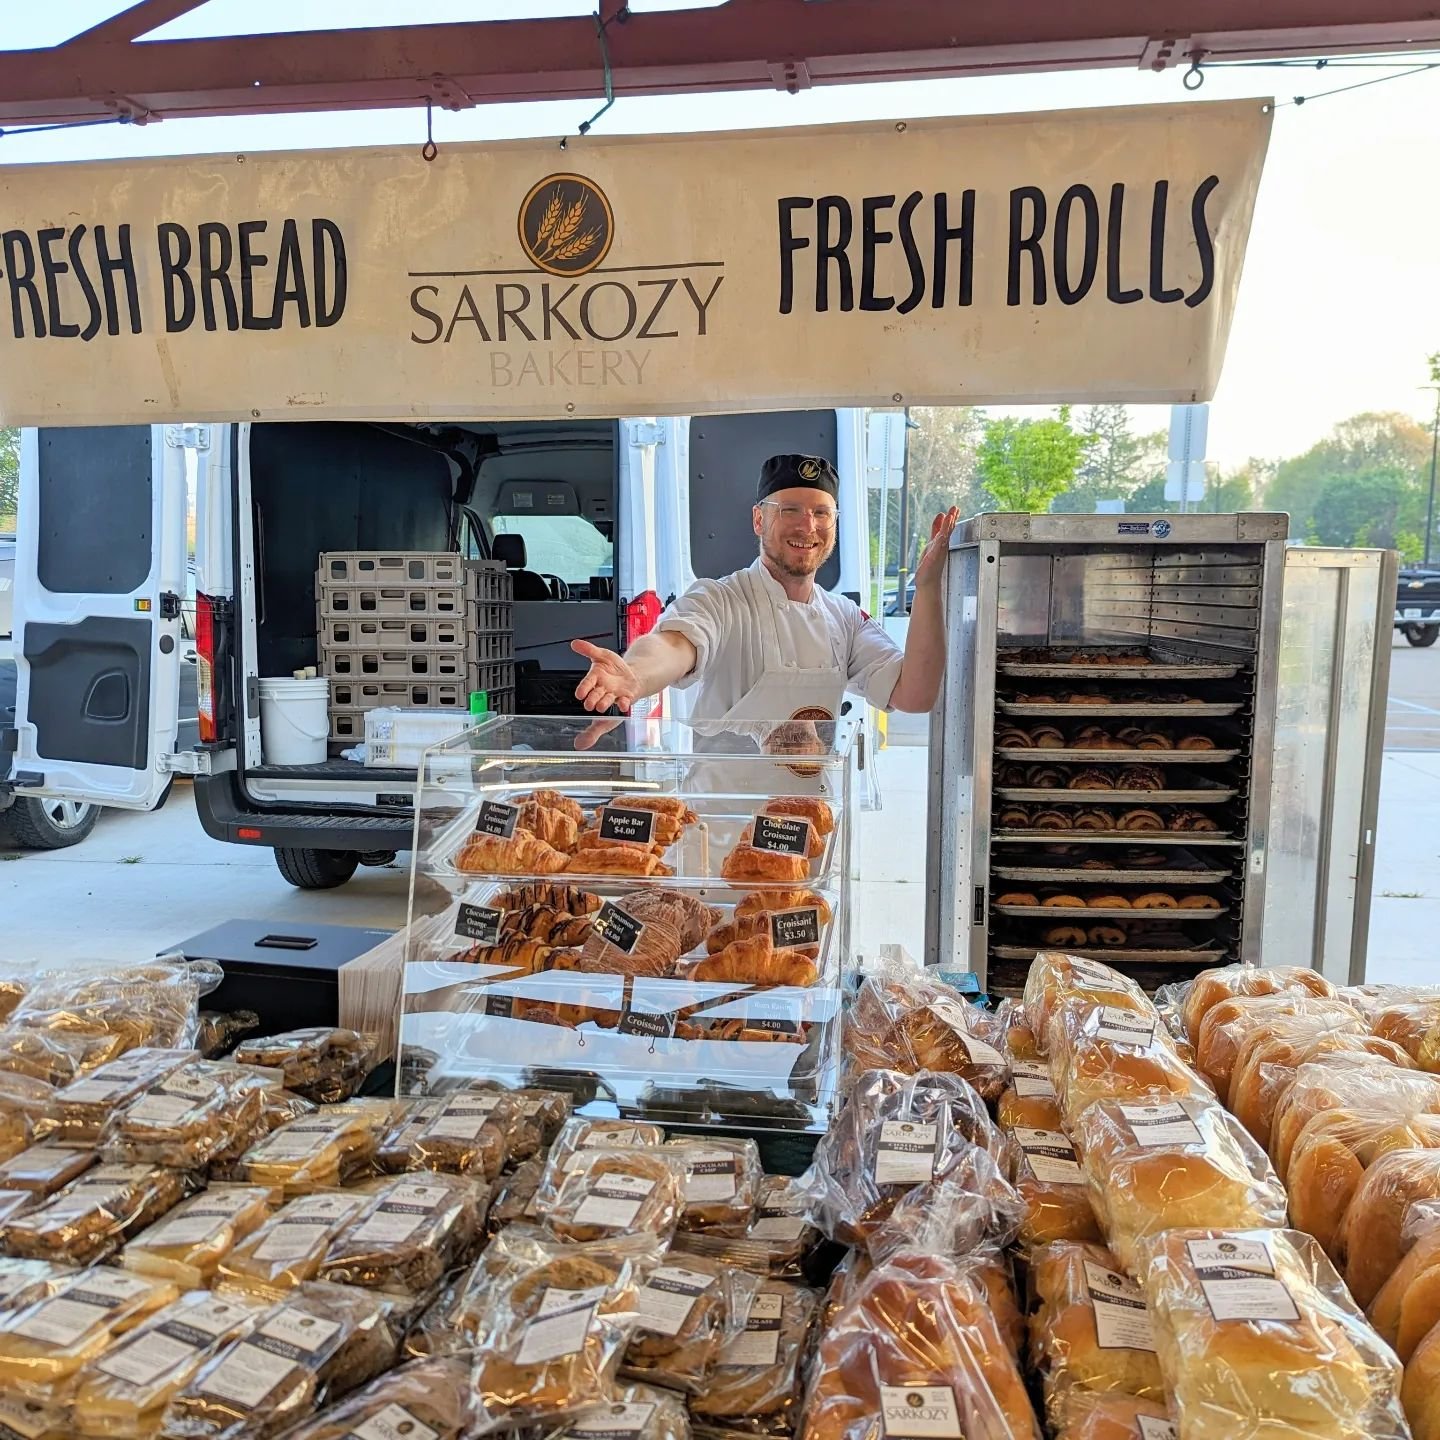 It's a beautiful day for a farmers market!

While we've got all the bread and pastries you need, there's also a lot of great produce available already! Rhubarb, asparagus, and more!

#sarkozybakery #bakery #farmersmarket #kalamazoofarmersmarket #mich